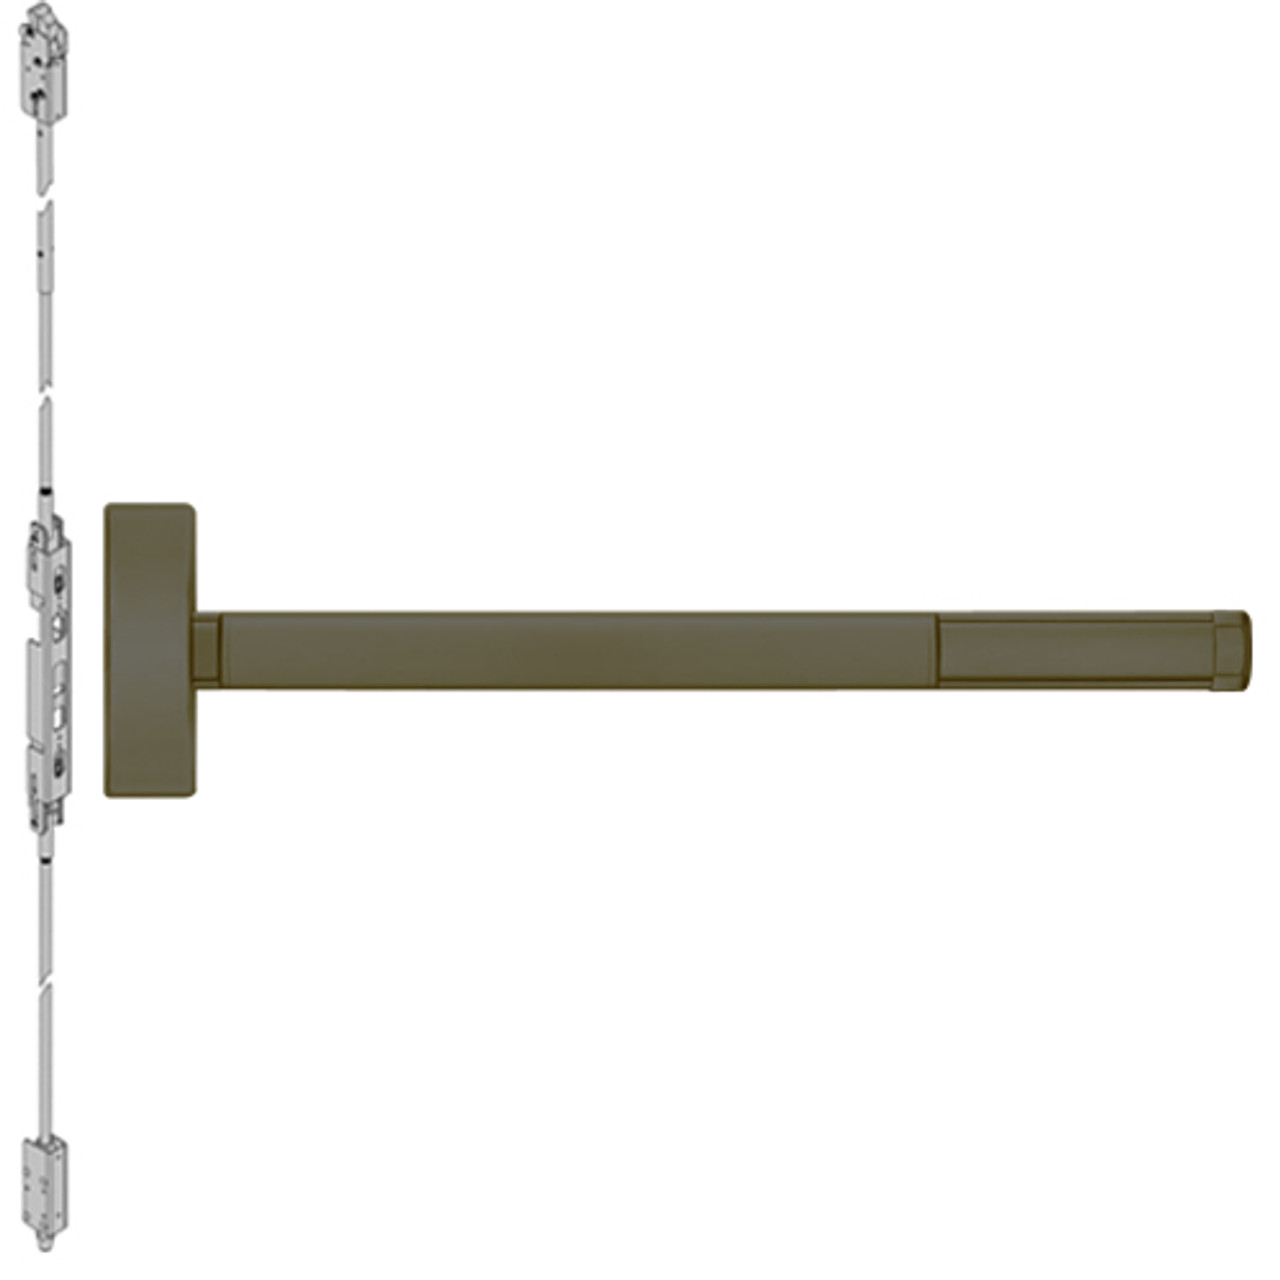 MLR2805-613-48 PHI 2800 Series Concealed Vertical Rod Exit Device with Motorized Latch Retraction Prepped for Key Controls Thumb Piece in Oil Rubbed Bronze Finish